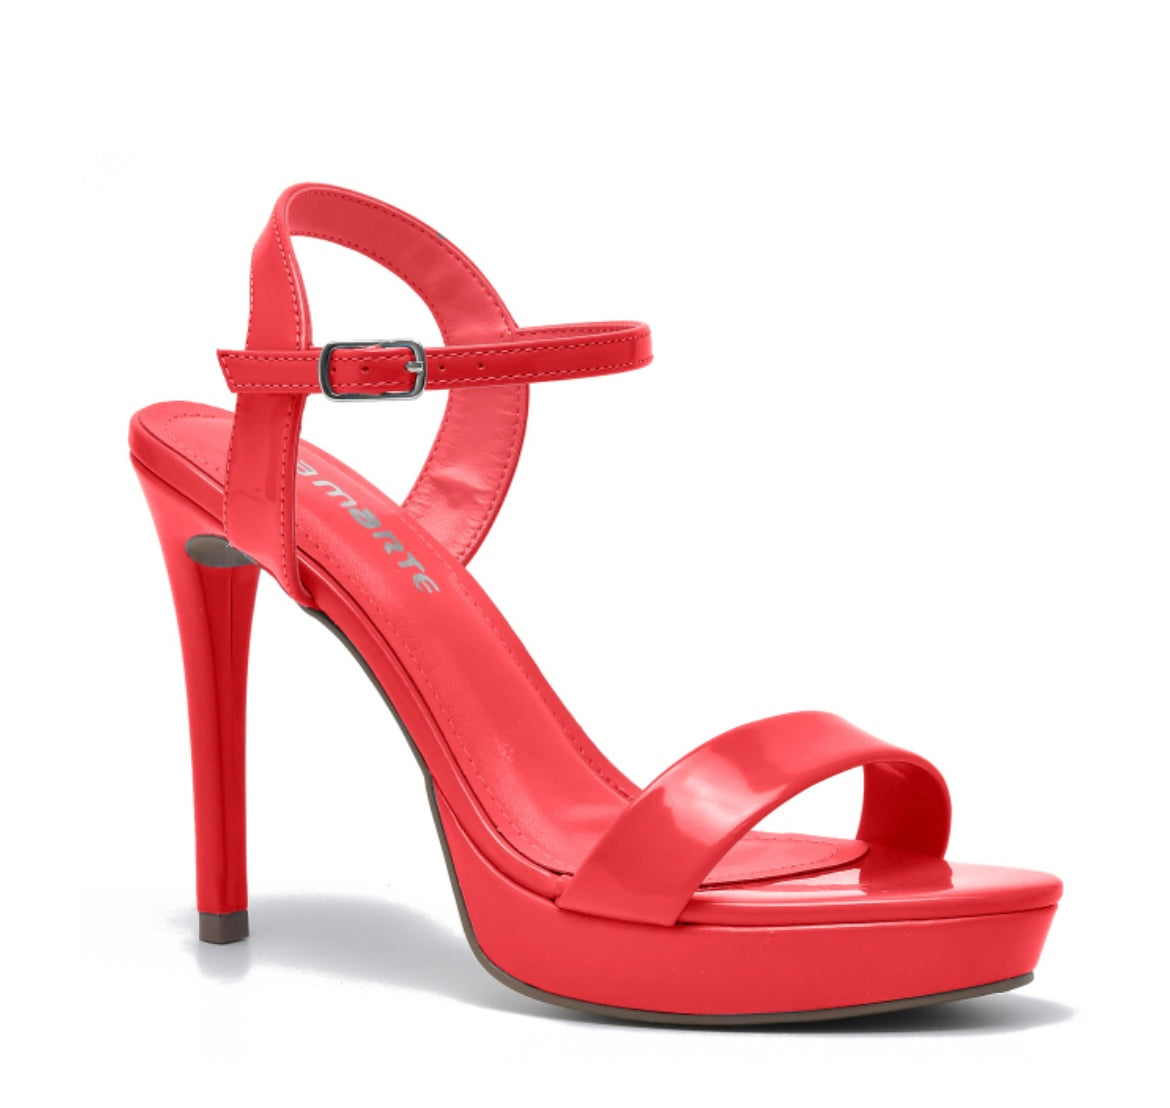 Shanon Red - Size 5,7,8,9,10,11